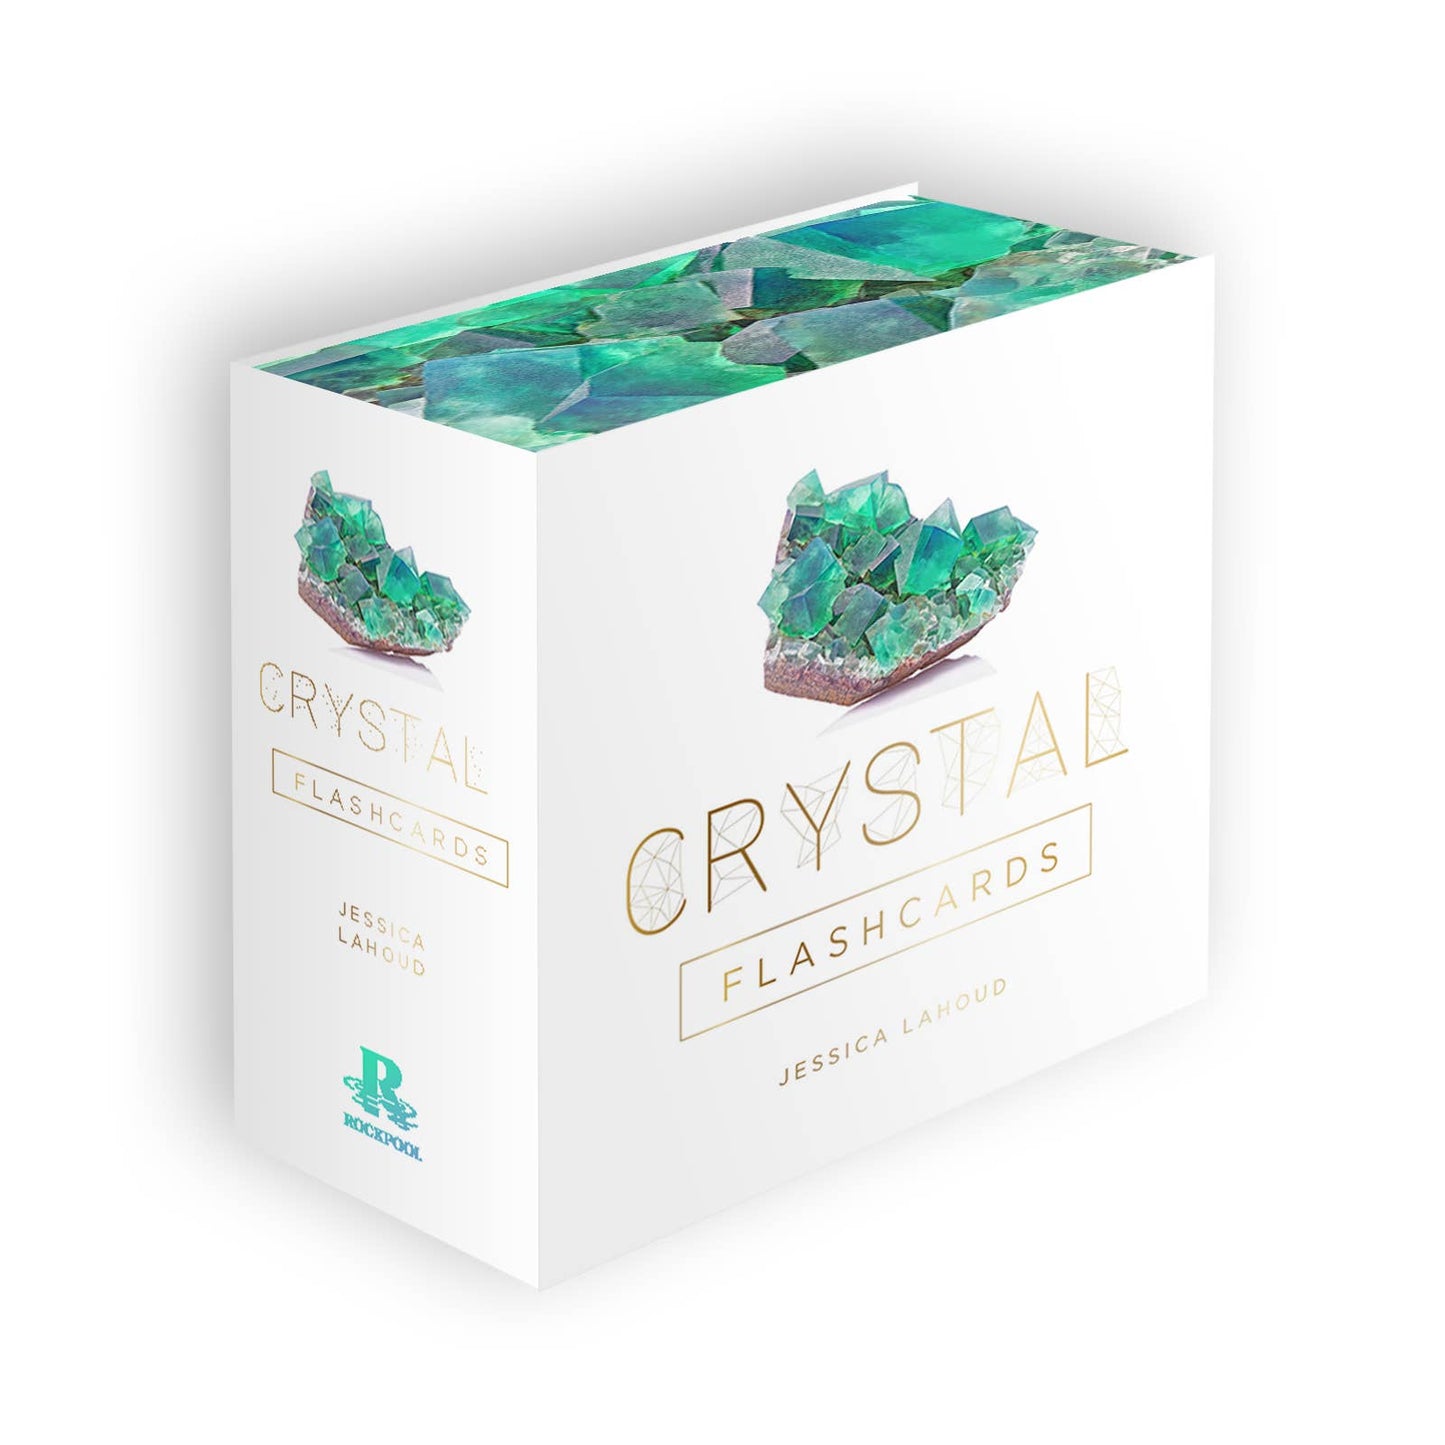 Crystal Flashcards: 50 Full-Color Cards with Metal Ring Holder